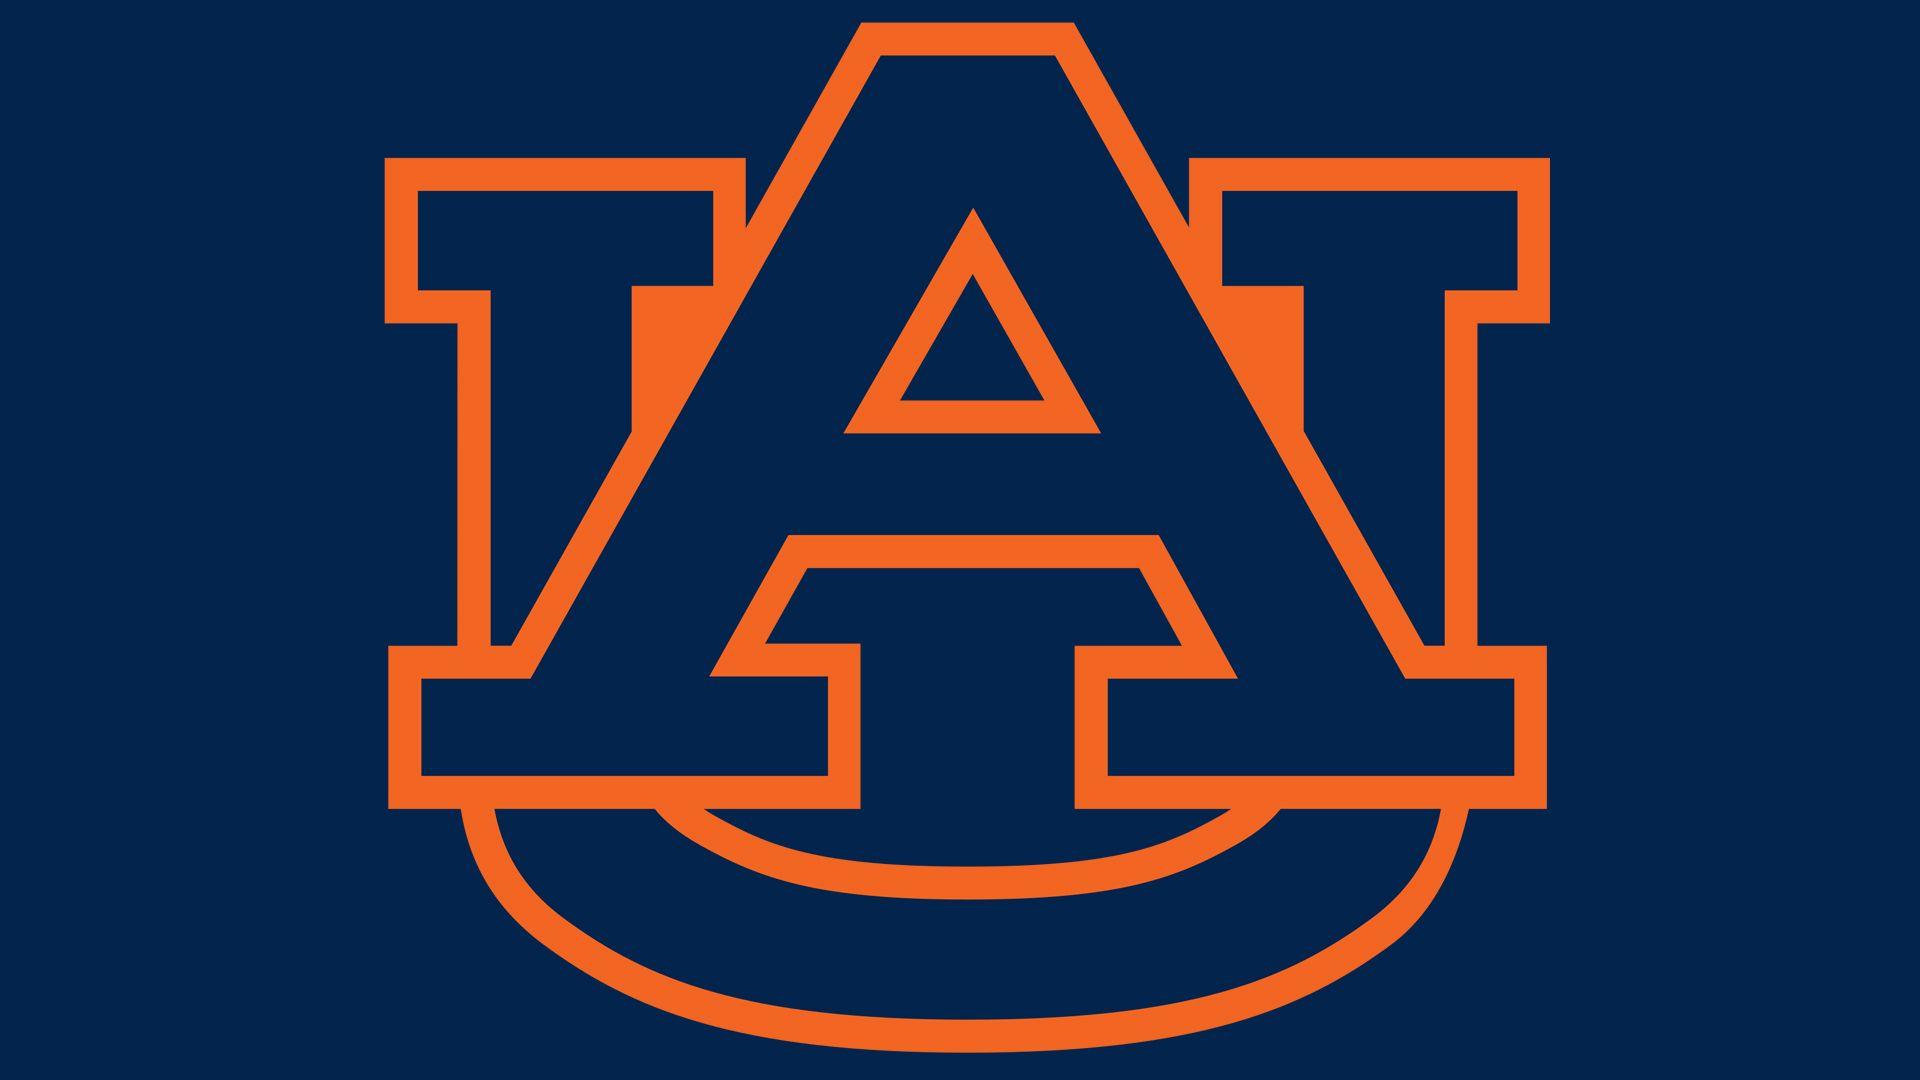 Auburn Logo - Auburn University Logo, Auburn University Symbol, Meaning, History ...